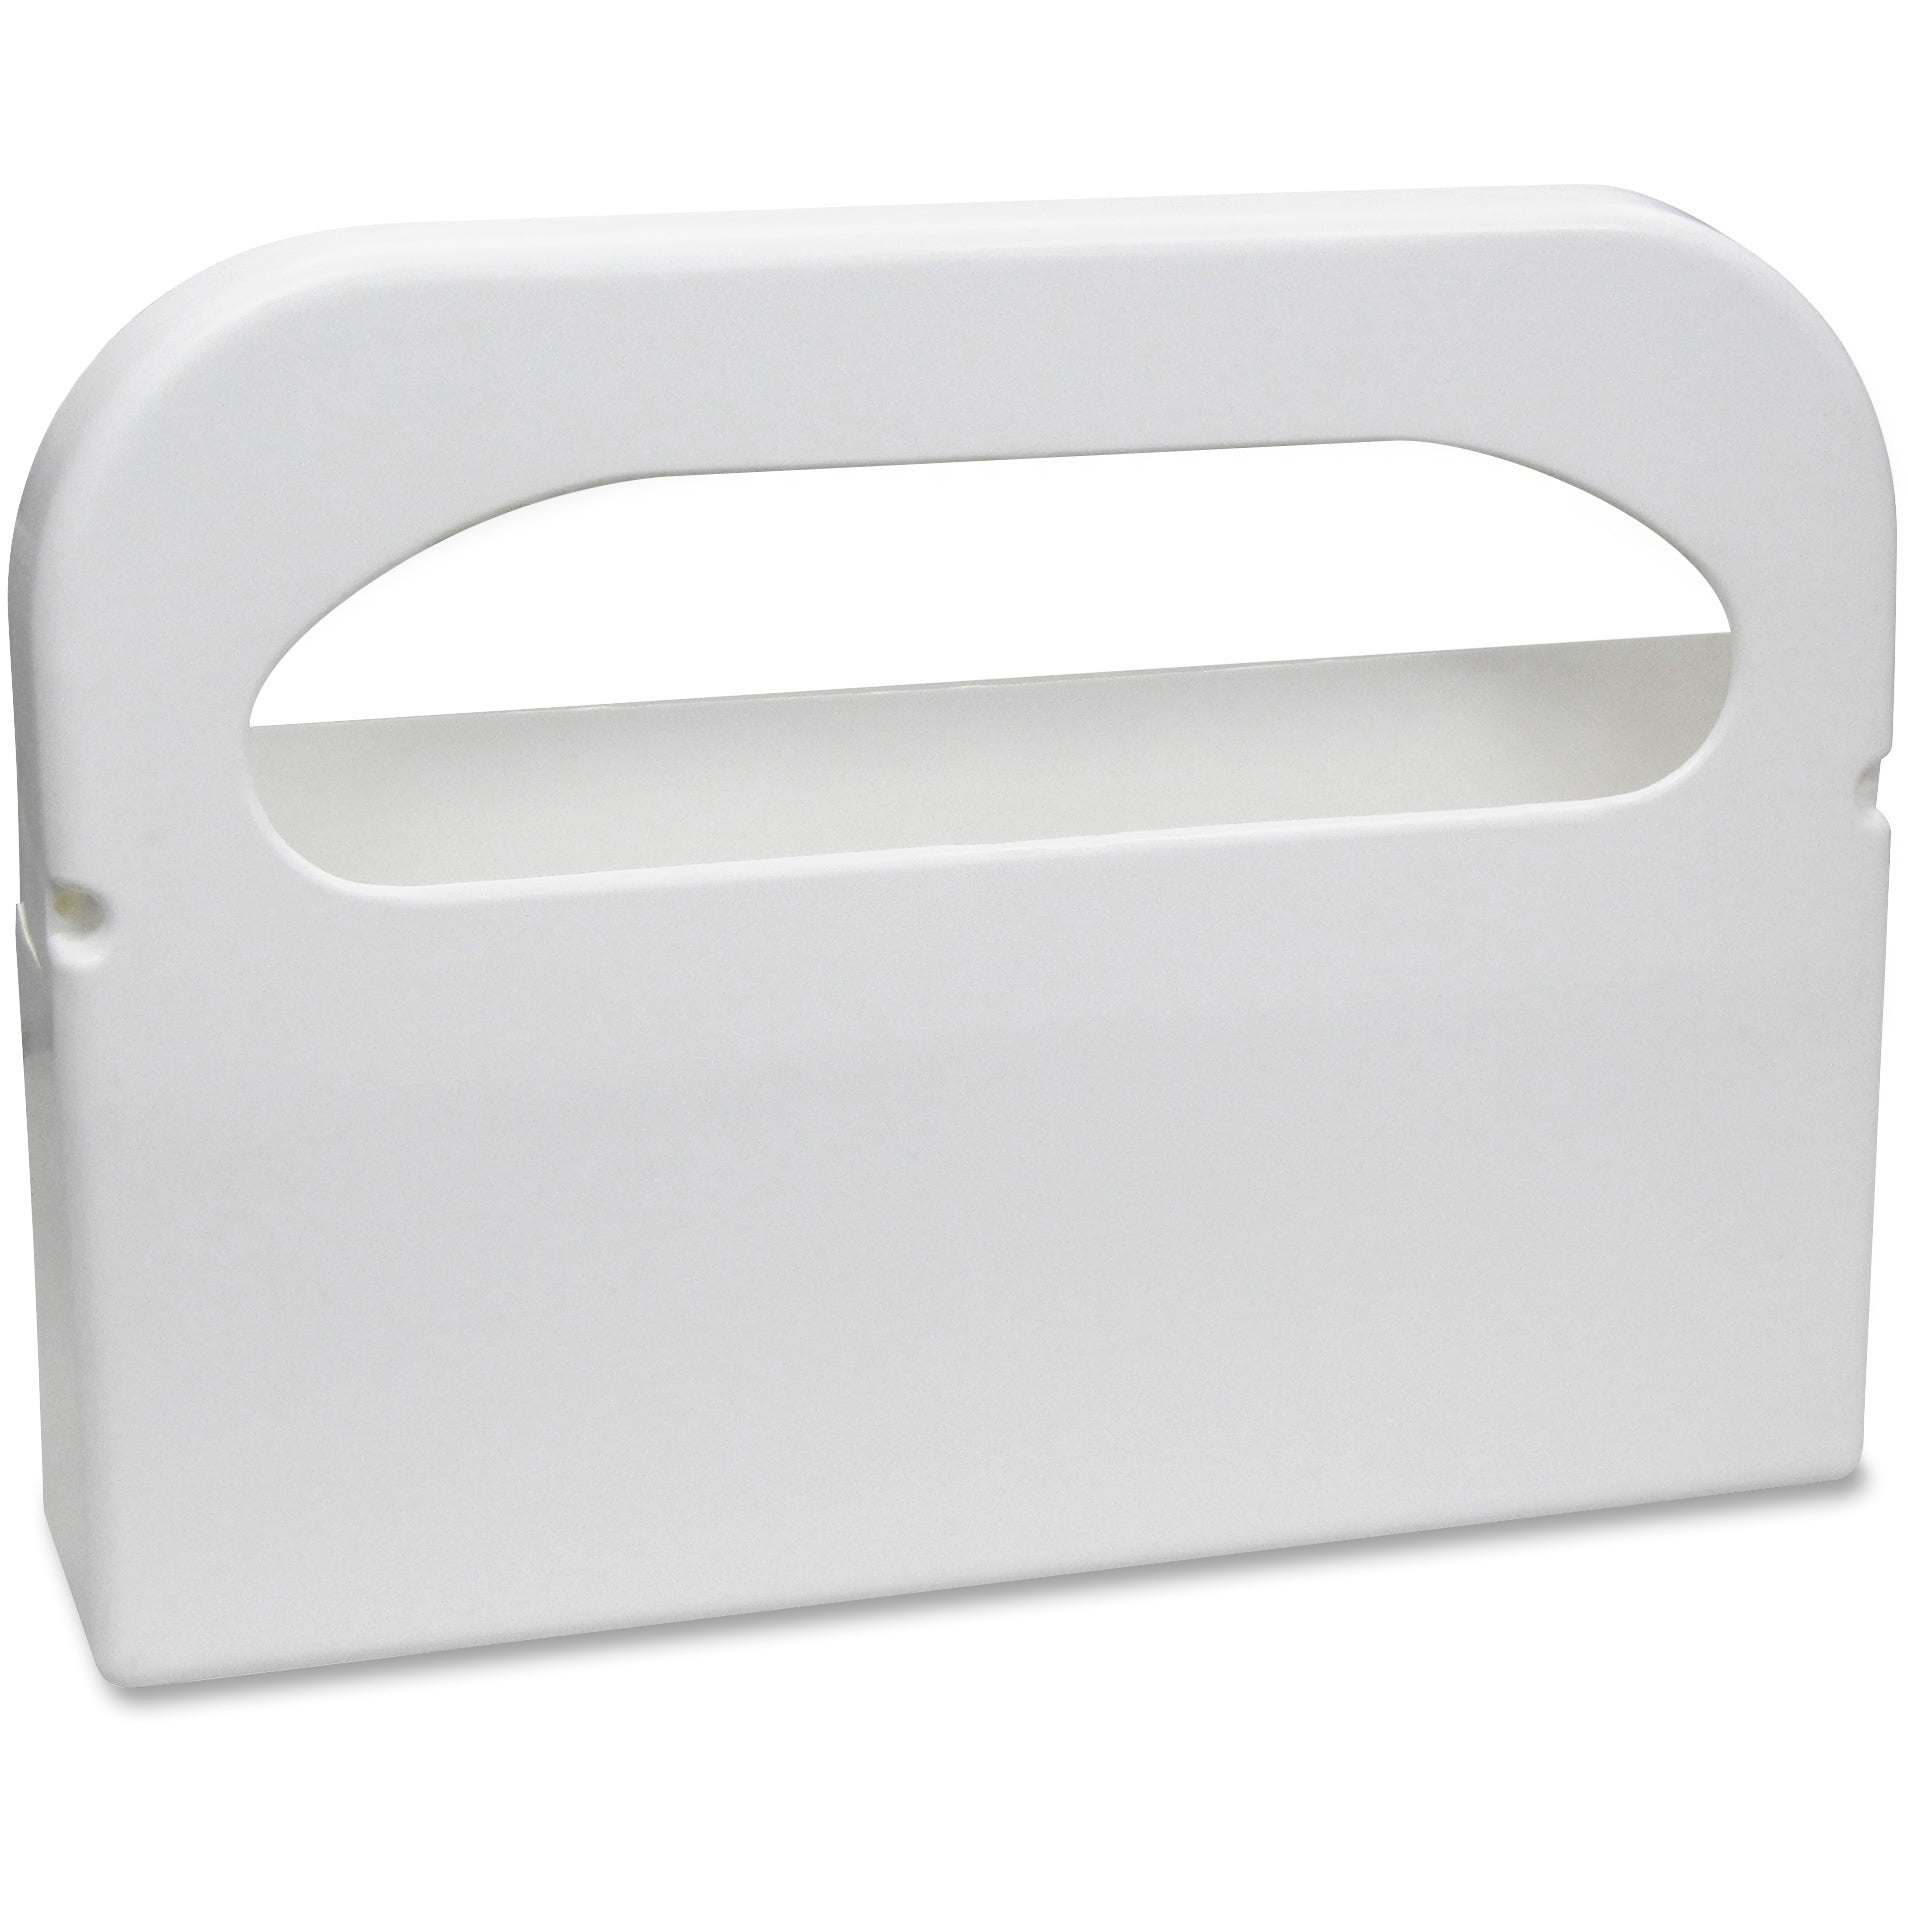 16-Inch by 11 1/2-Inch by 3-Inch Chrome Excellante Half Fold Toilet Seat Cover Dispenser